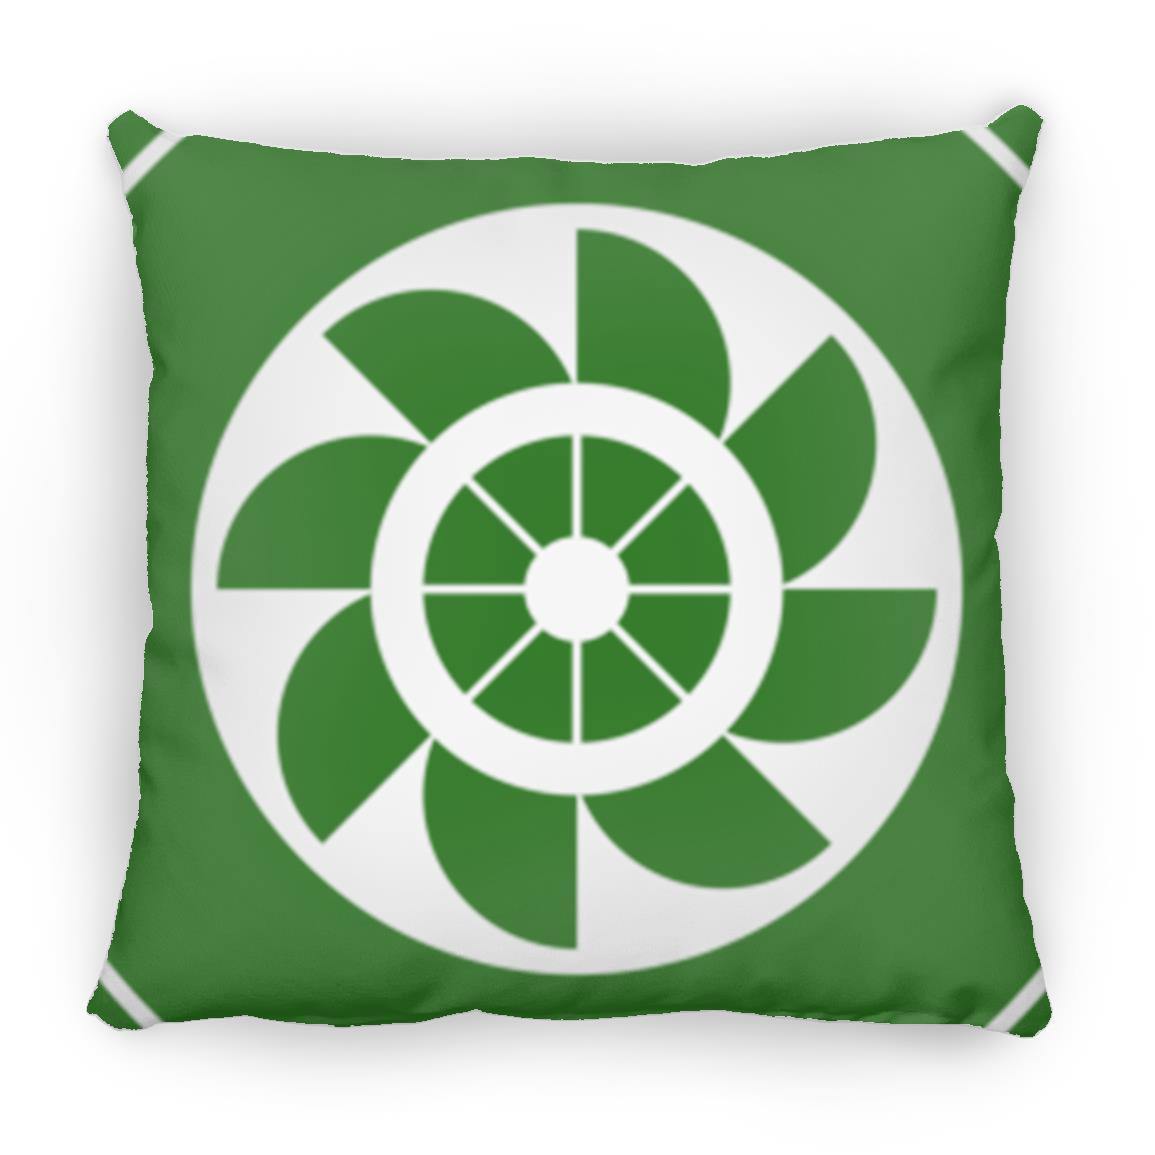 Crop Circle Pillow - Owlesbury - Shapes of Wisdom